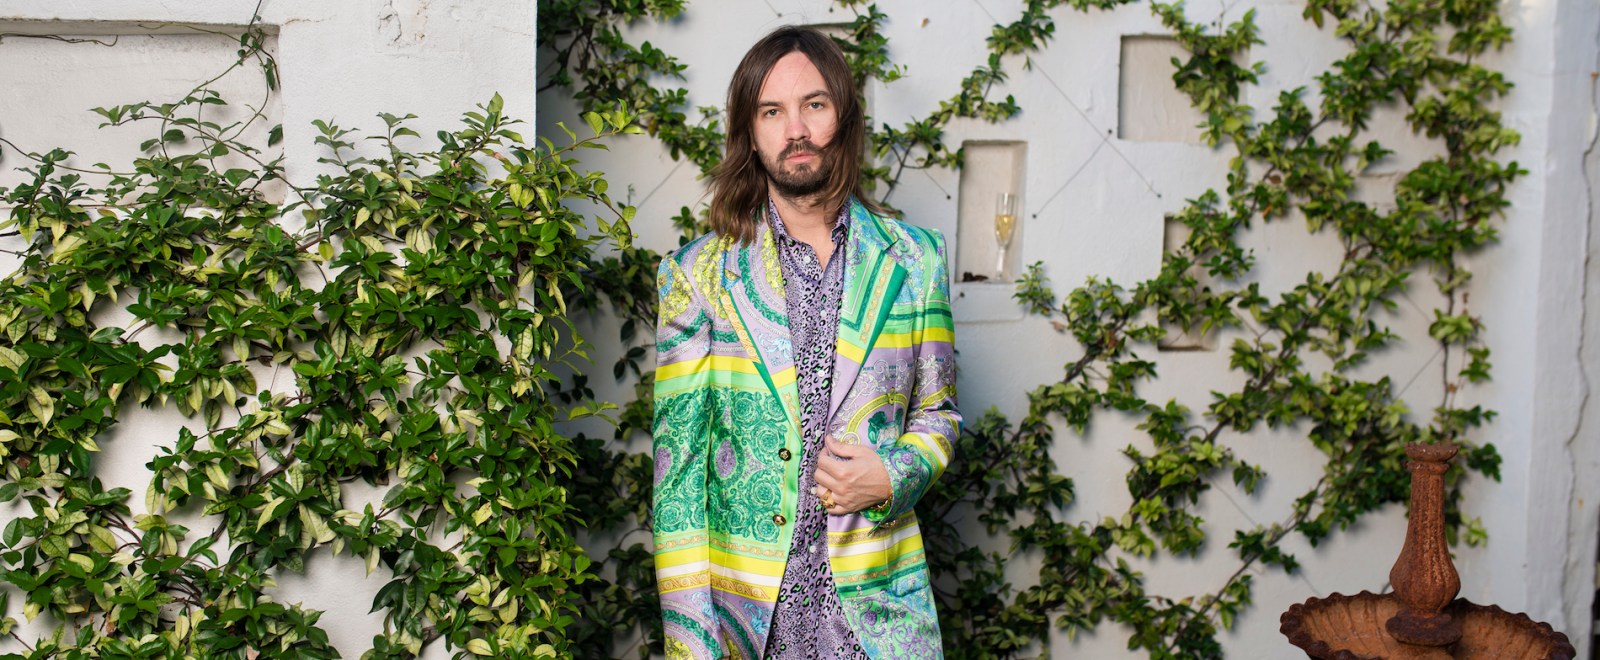 tame-impala-kevin-parker-getty-full.jpg